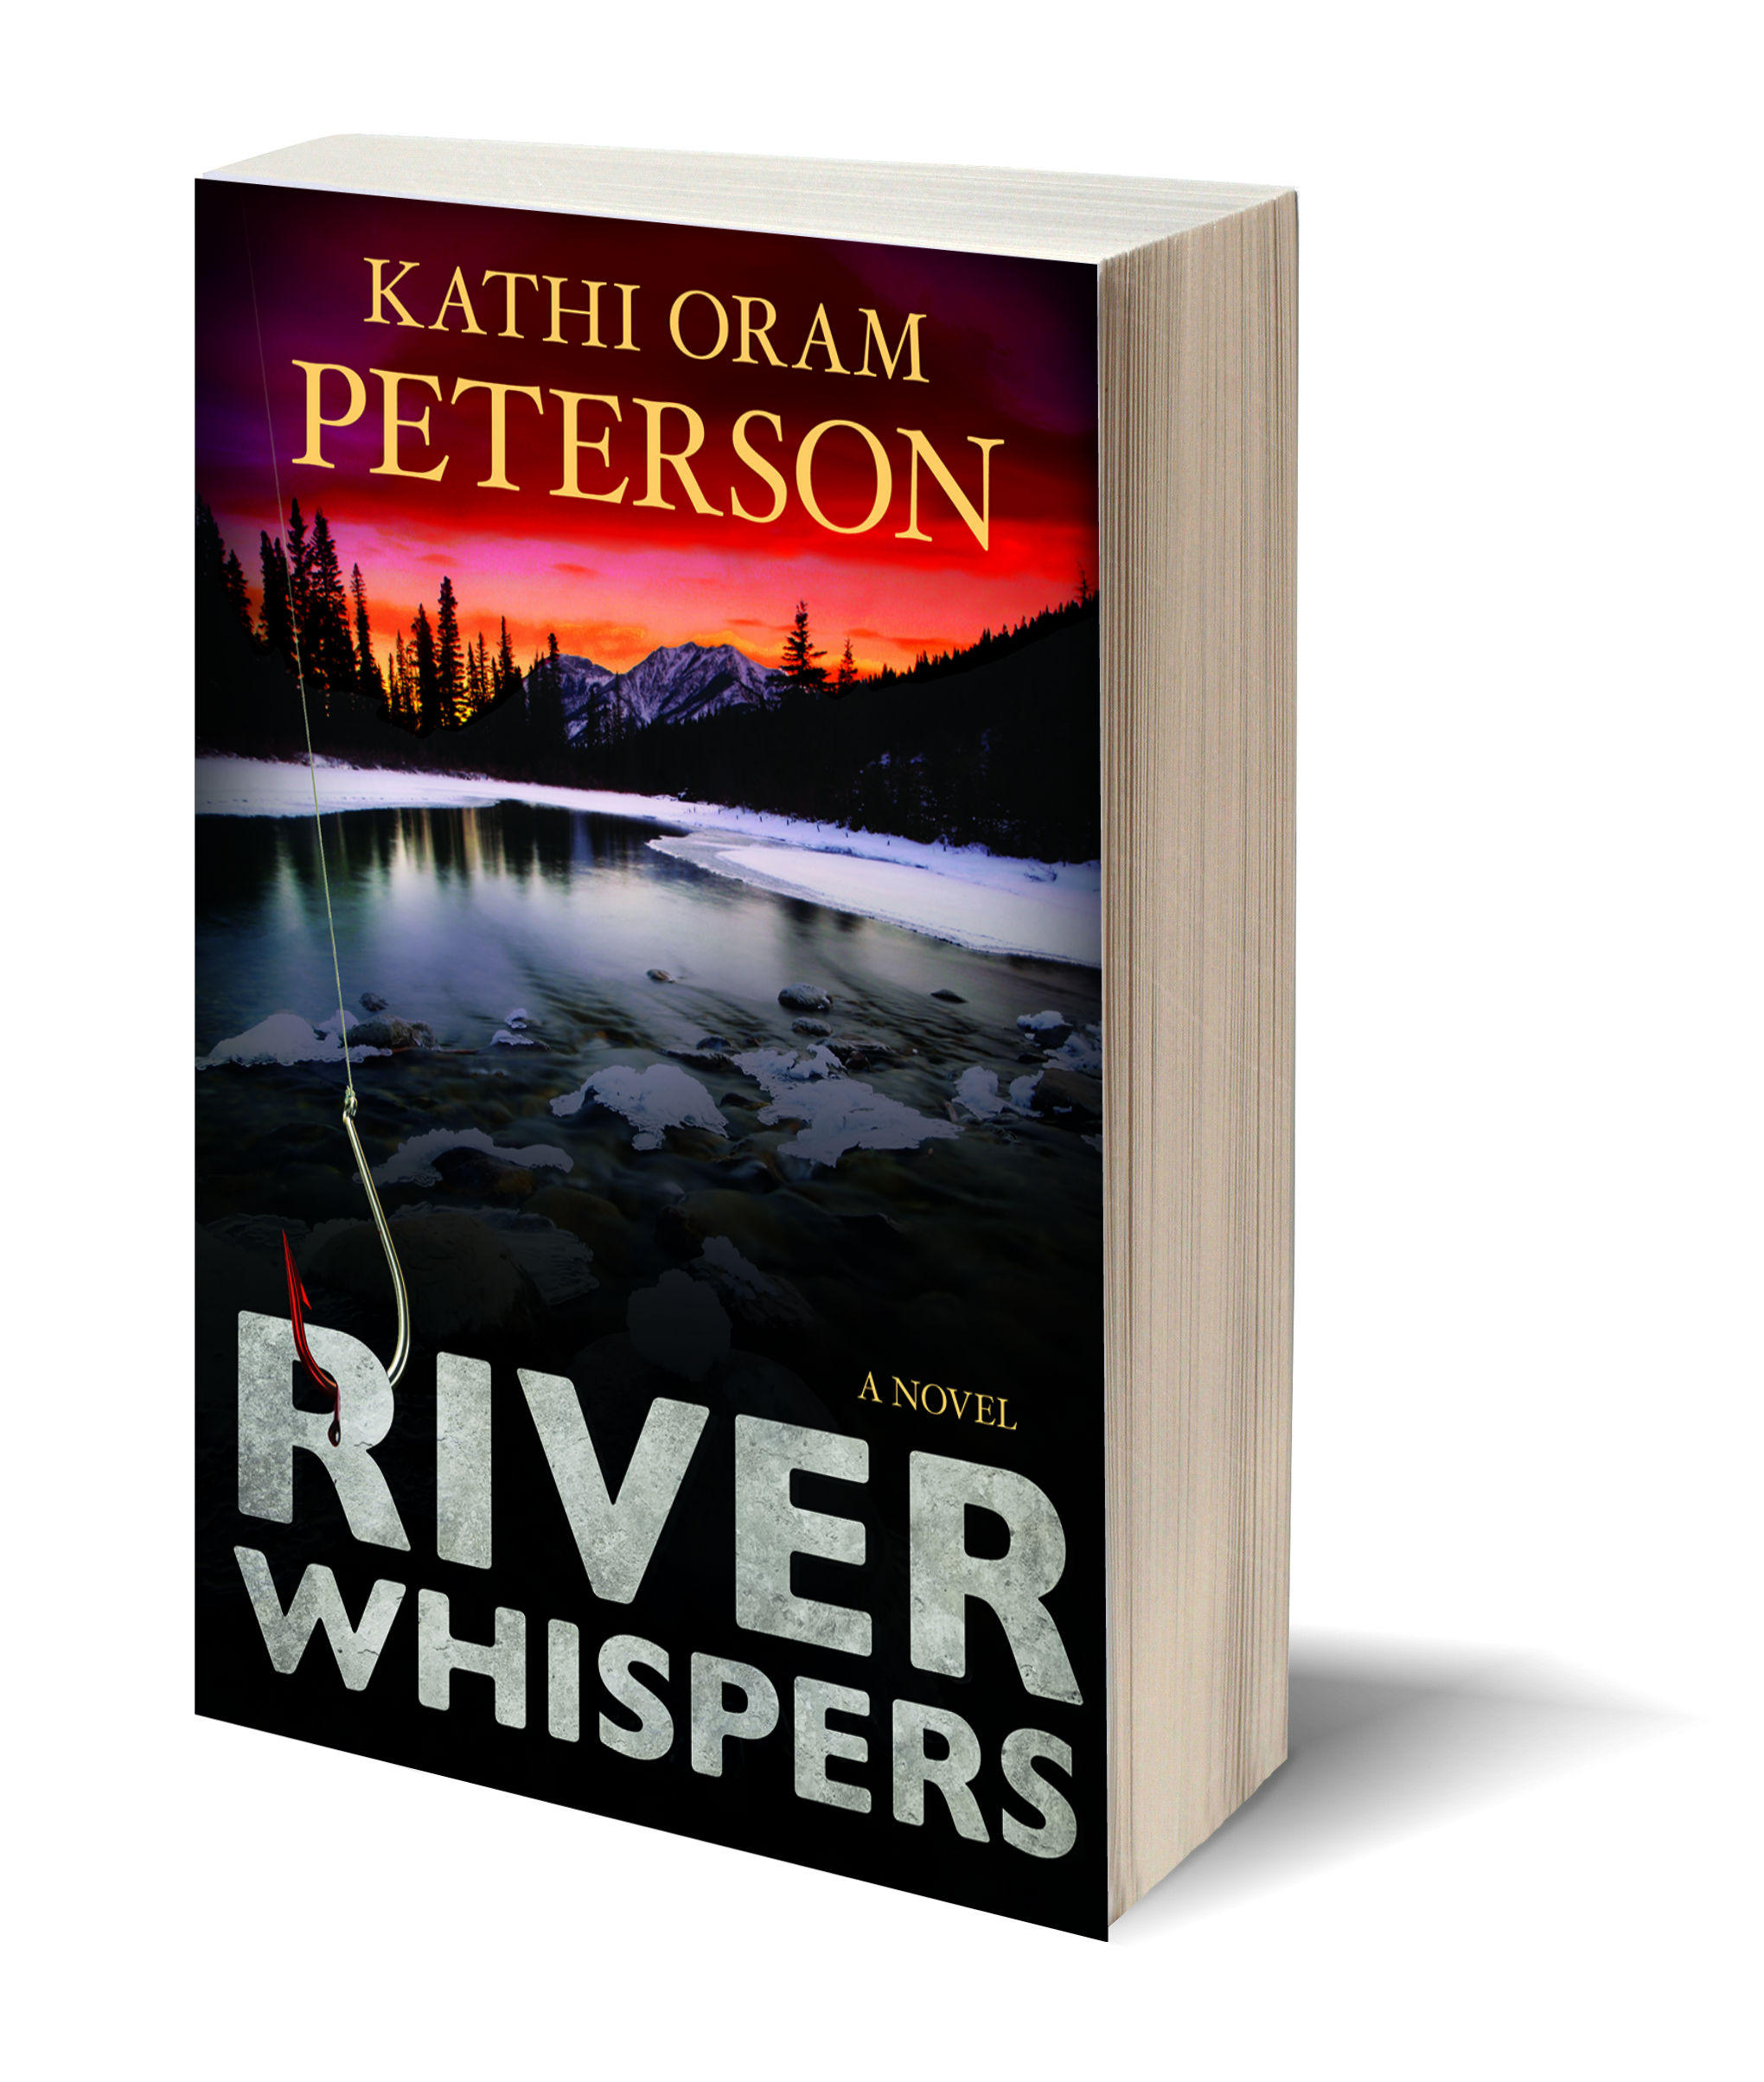 River Whispers